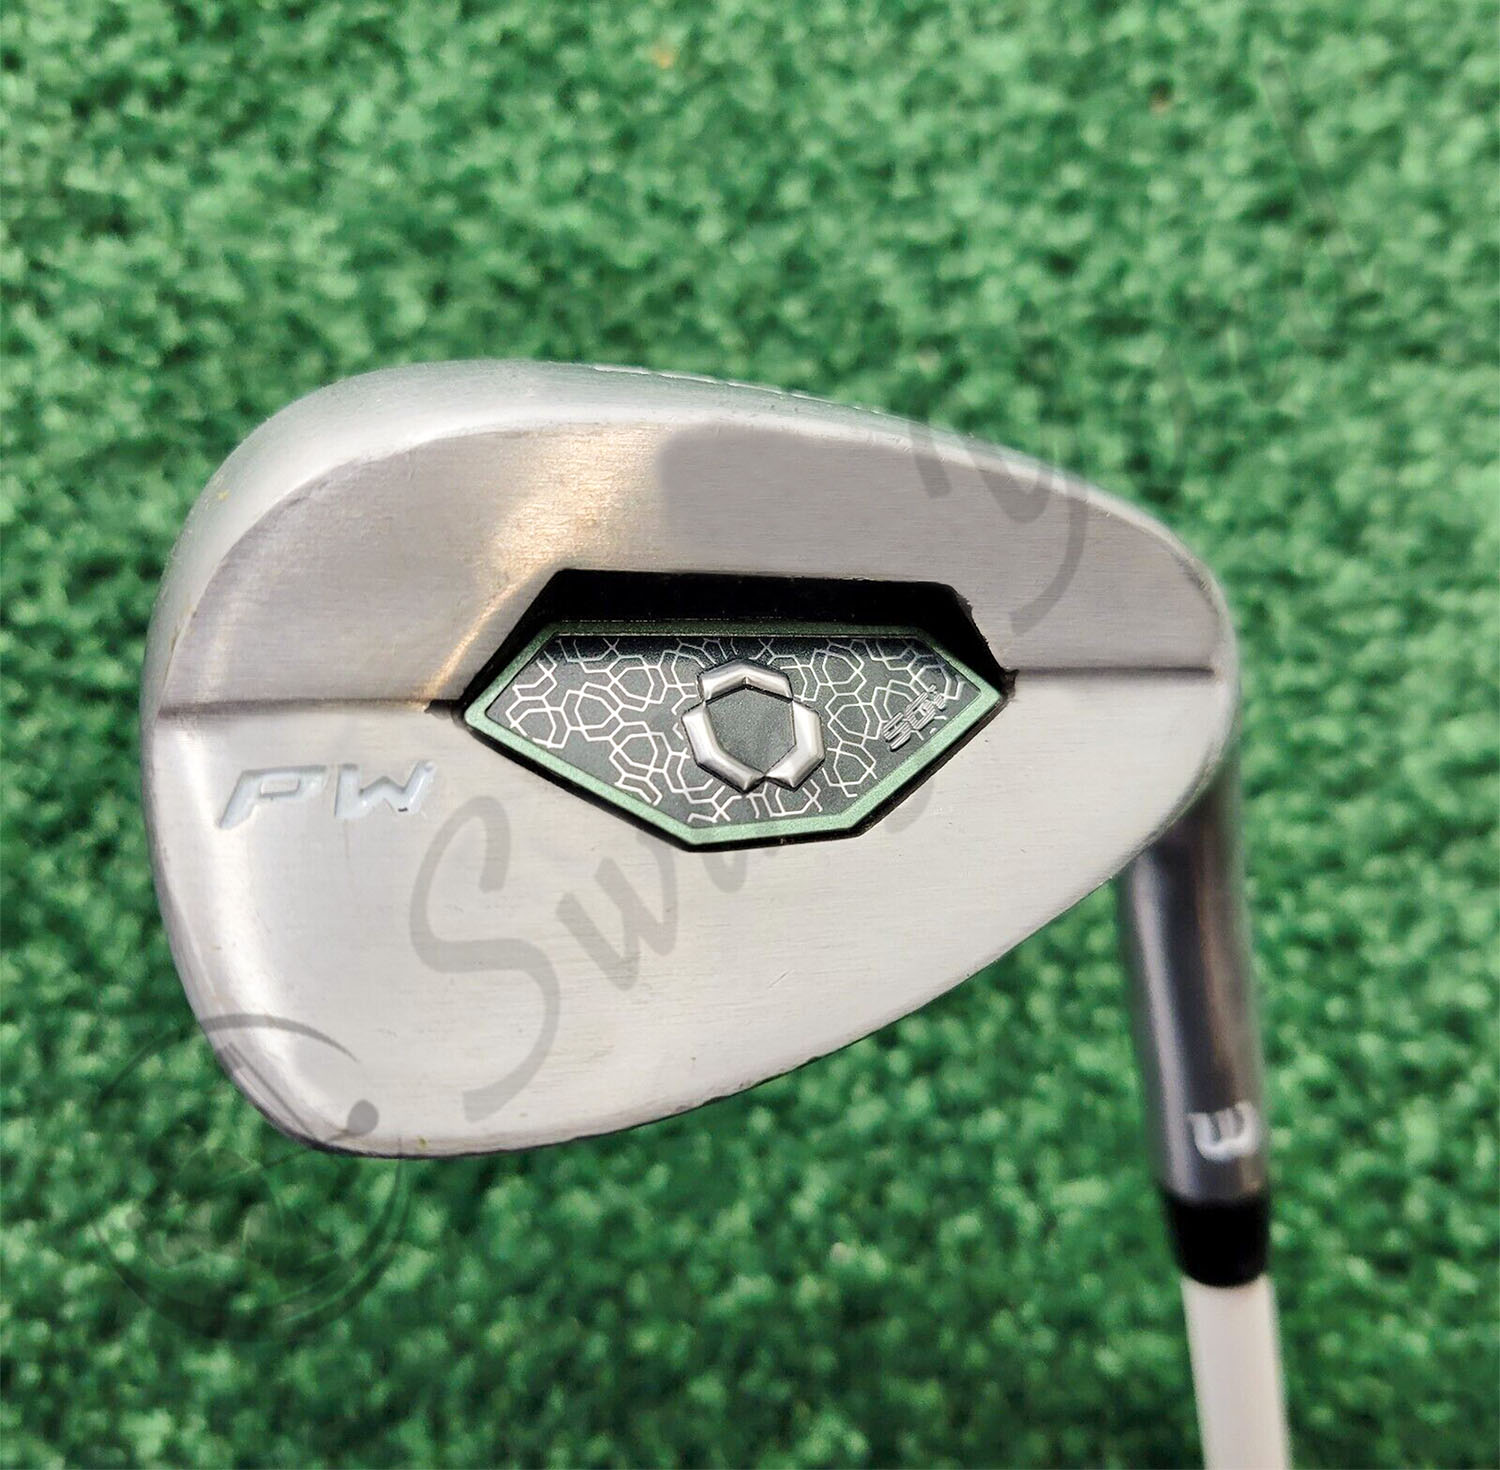 Showing the Pitching Wedge Clubhead of Wilson Women’s SGI Profile